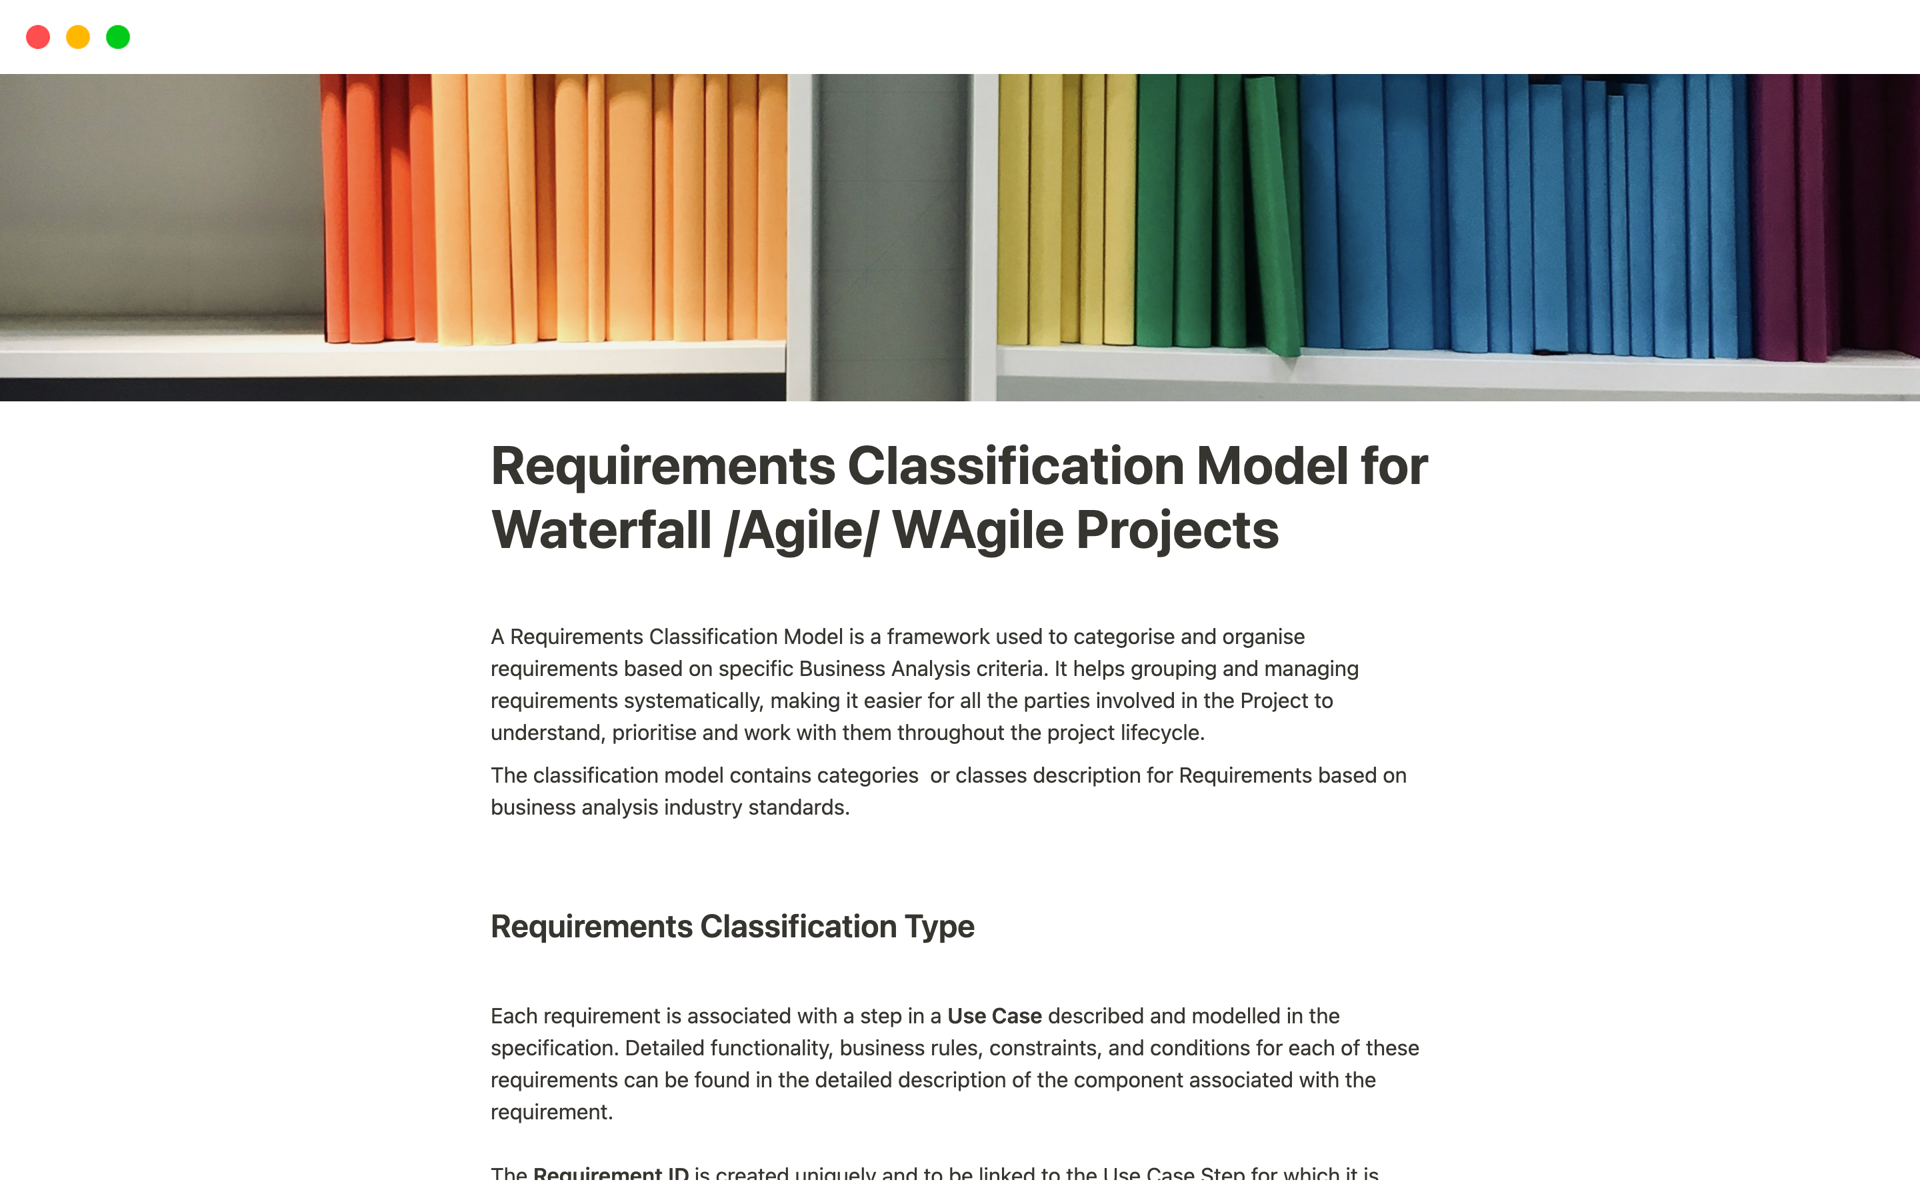 The Requirements Classification Model helps sort and prioritize project requirements based on specific criteria, making them easier for everyone to understand and manage effectively.